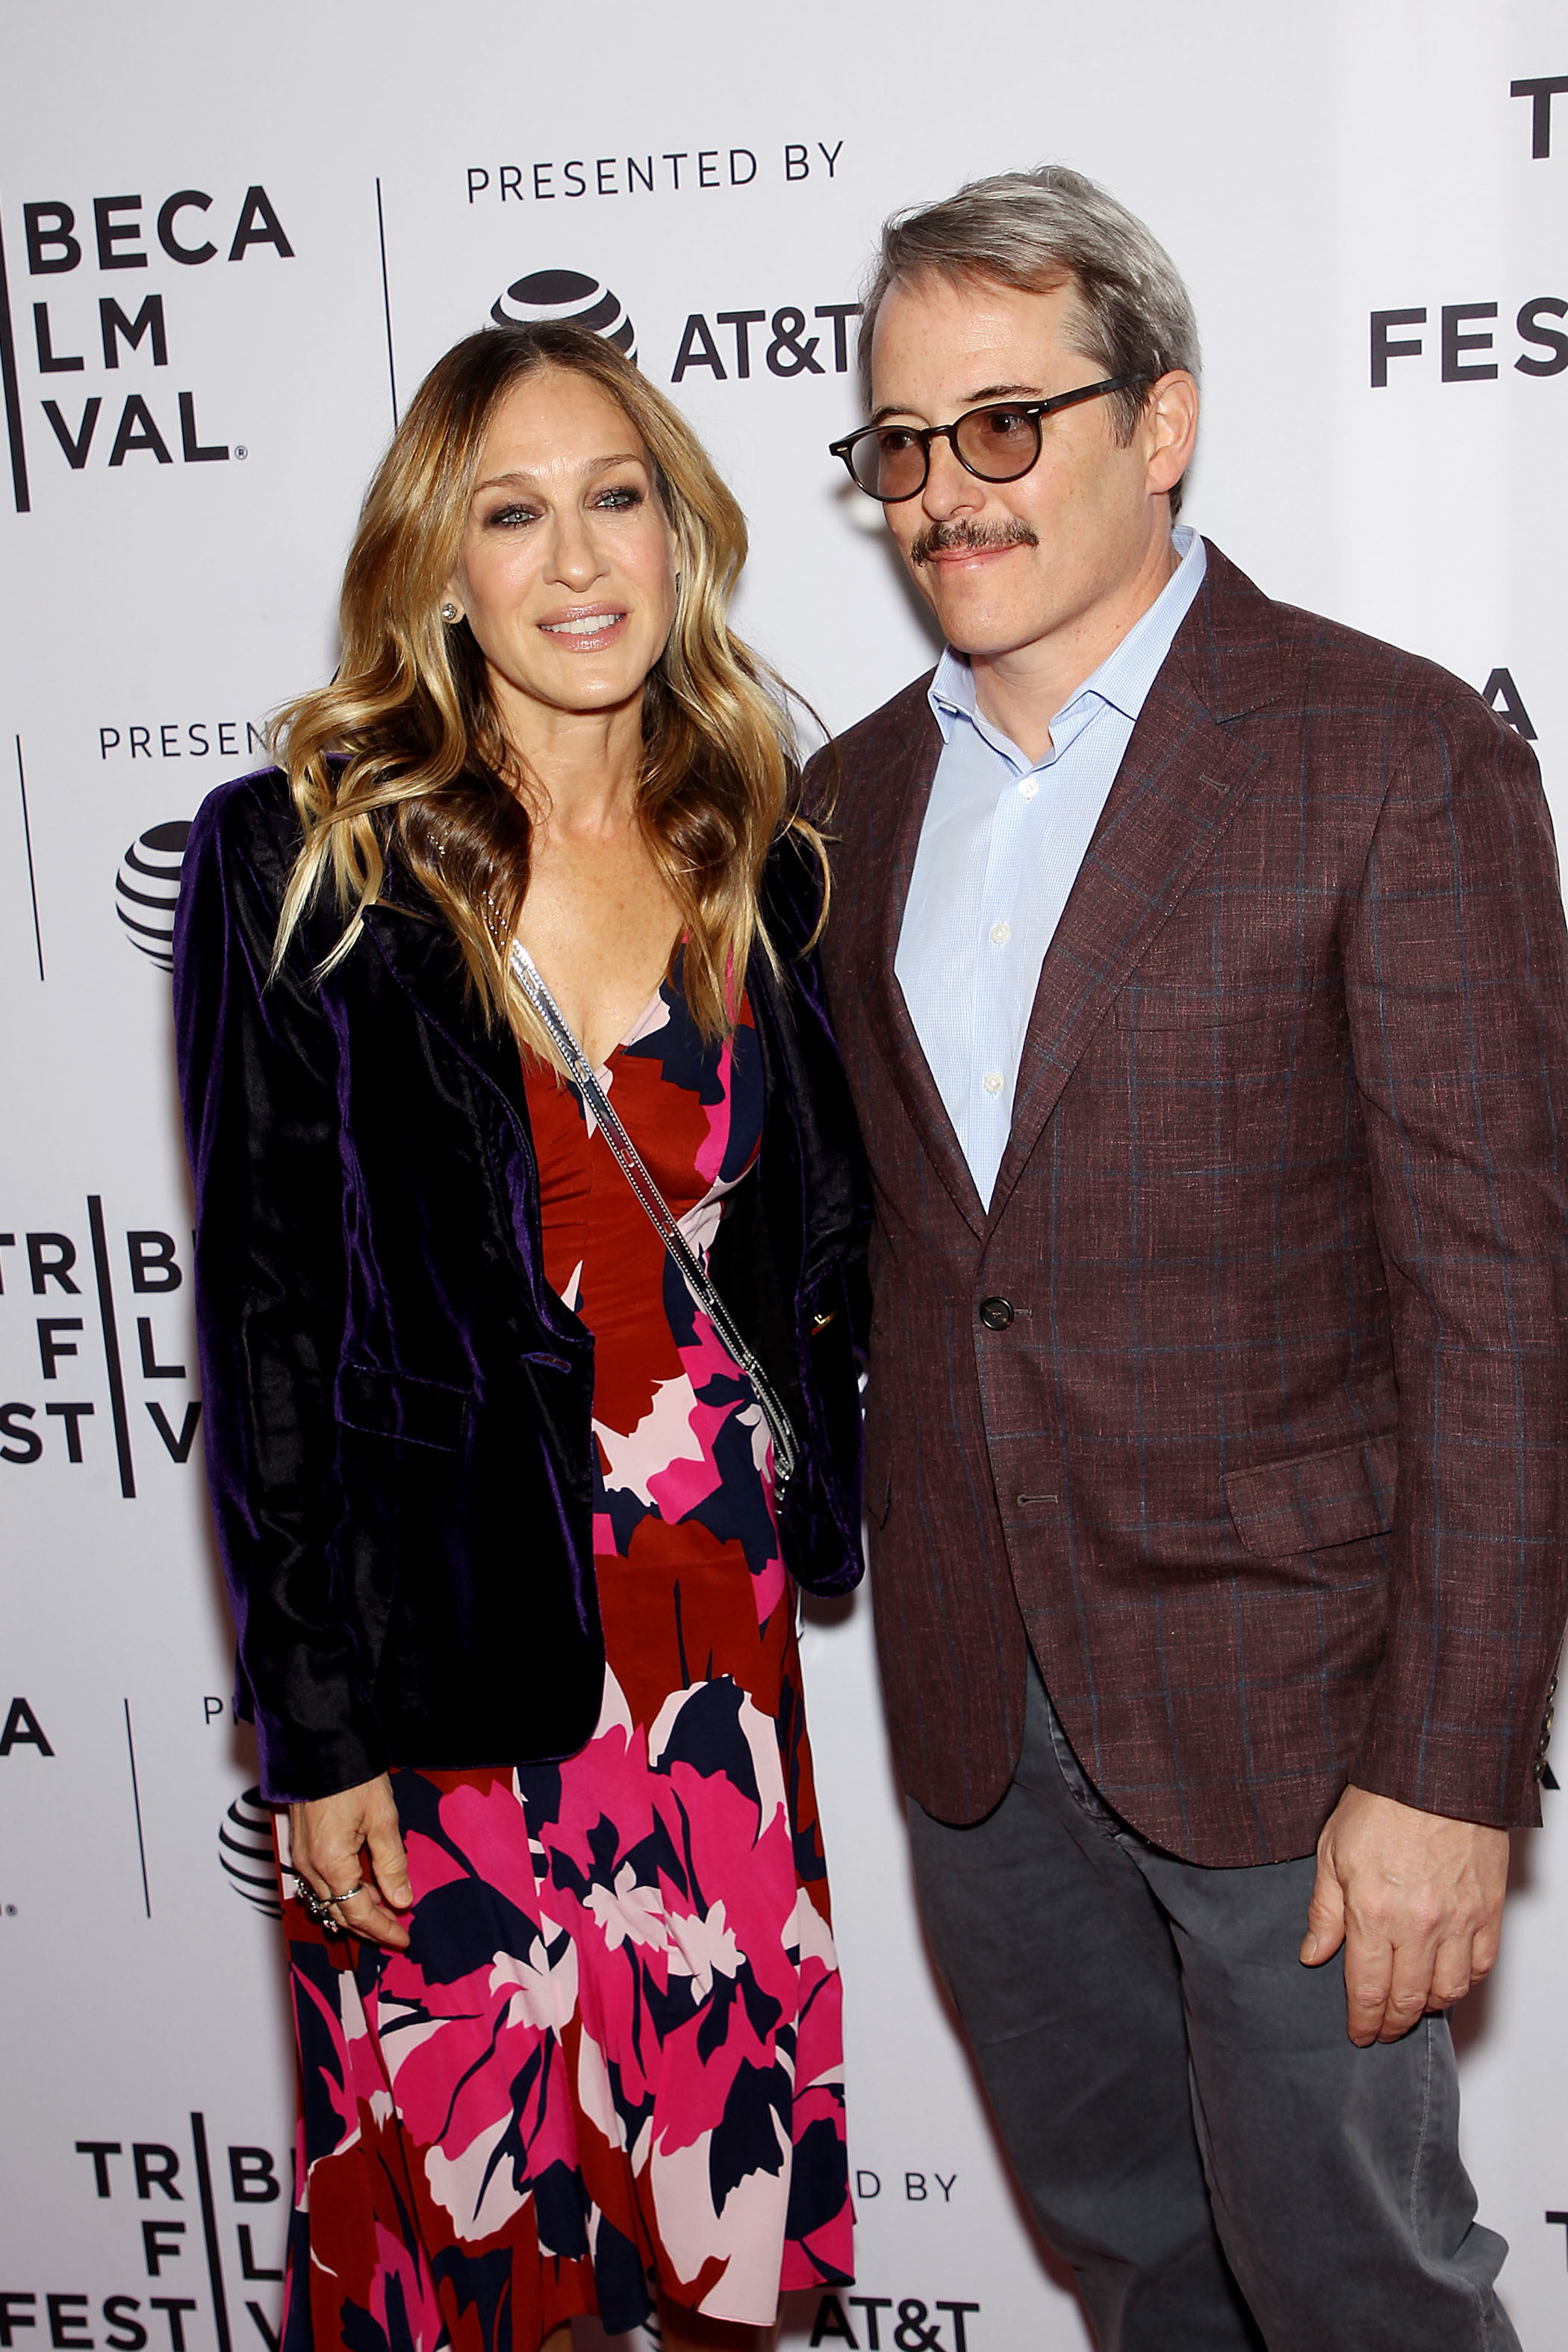 <p><a href="https://www.wonderwall.com/celebrity/profiles/overview/sarah-jessica-parker-395.article">Sarah Jessica Parker</a> met husband Matthew Broderick in November 1991 after she'd ended a long romance with Robert Downey Jr. The "Ferris Bueller's Day Off" star had become friends with her older brothers, Pippin and Toby, when he directed a play for the Naked Angels Theater Company, in which they were involved, so they introduced her. "My memory is that literally months passed when I didn't ask her for a date," Matthew told The New York Times. "Your memory is correct," SJP told him, then informed the NYT reporter that Matthew finally did call on Feb. 1, 1992. "He left a very charming, very self-effacing message on the machine. You know, 'Hi, it's Matthew Broderick.' You had to use your last name." Quipped Matthew: "I had to give her my credits." They had their first date at New York City's Cornelia Street Cafe, married in 1997 and went on to welcome three kids.</p>